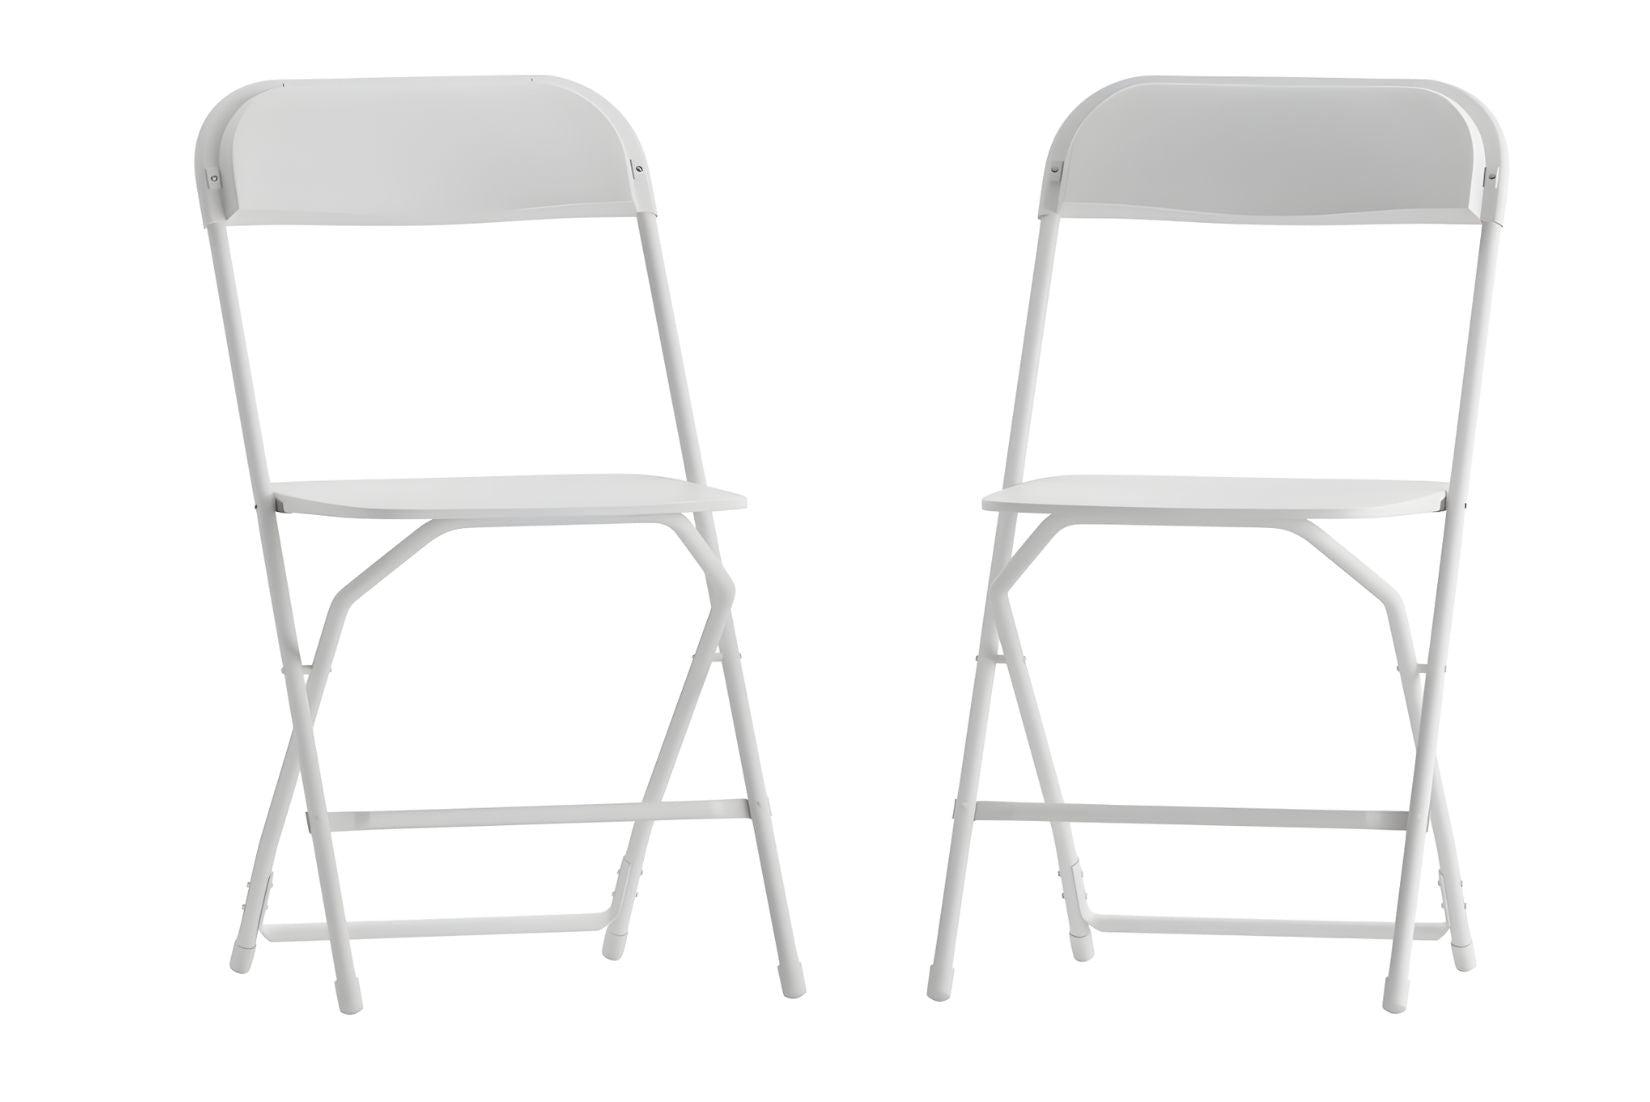 Beige folding chairs for corporate picnic or outdoor reception party. Available for pickup or delivery in Maryland.